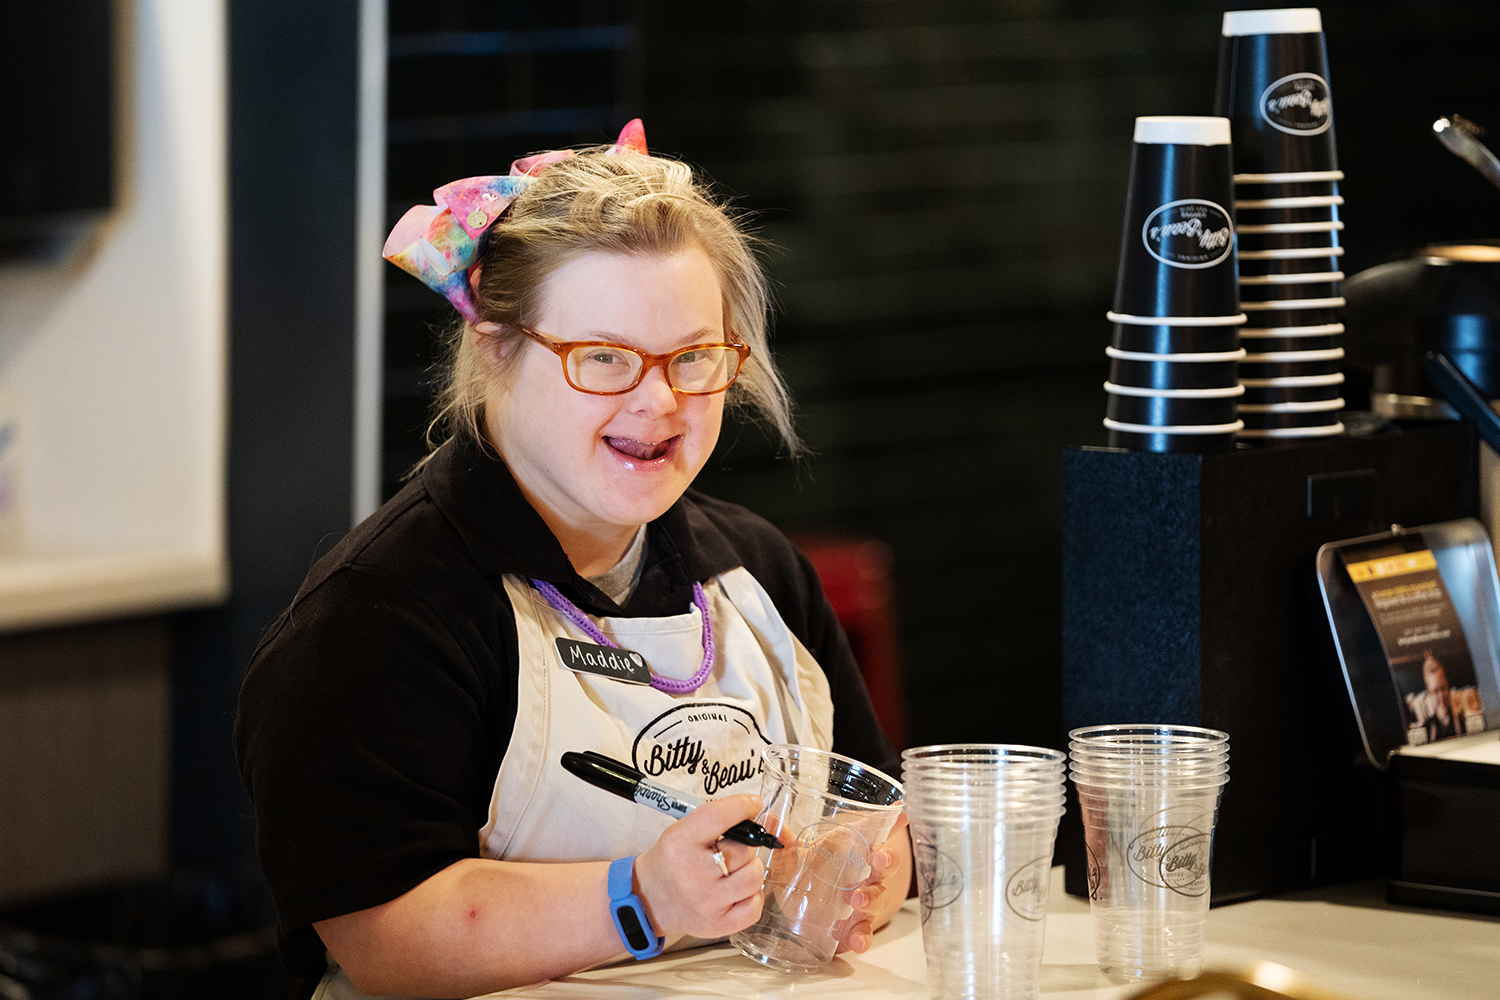 Female employee stands at a counter, smiling at the camera. She holds a plastic cup and a sharpie, with stacks of cups in front of her. She wears a black shirt, a beige apron with logo, and colorful accessories. 